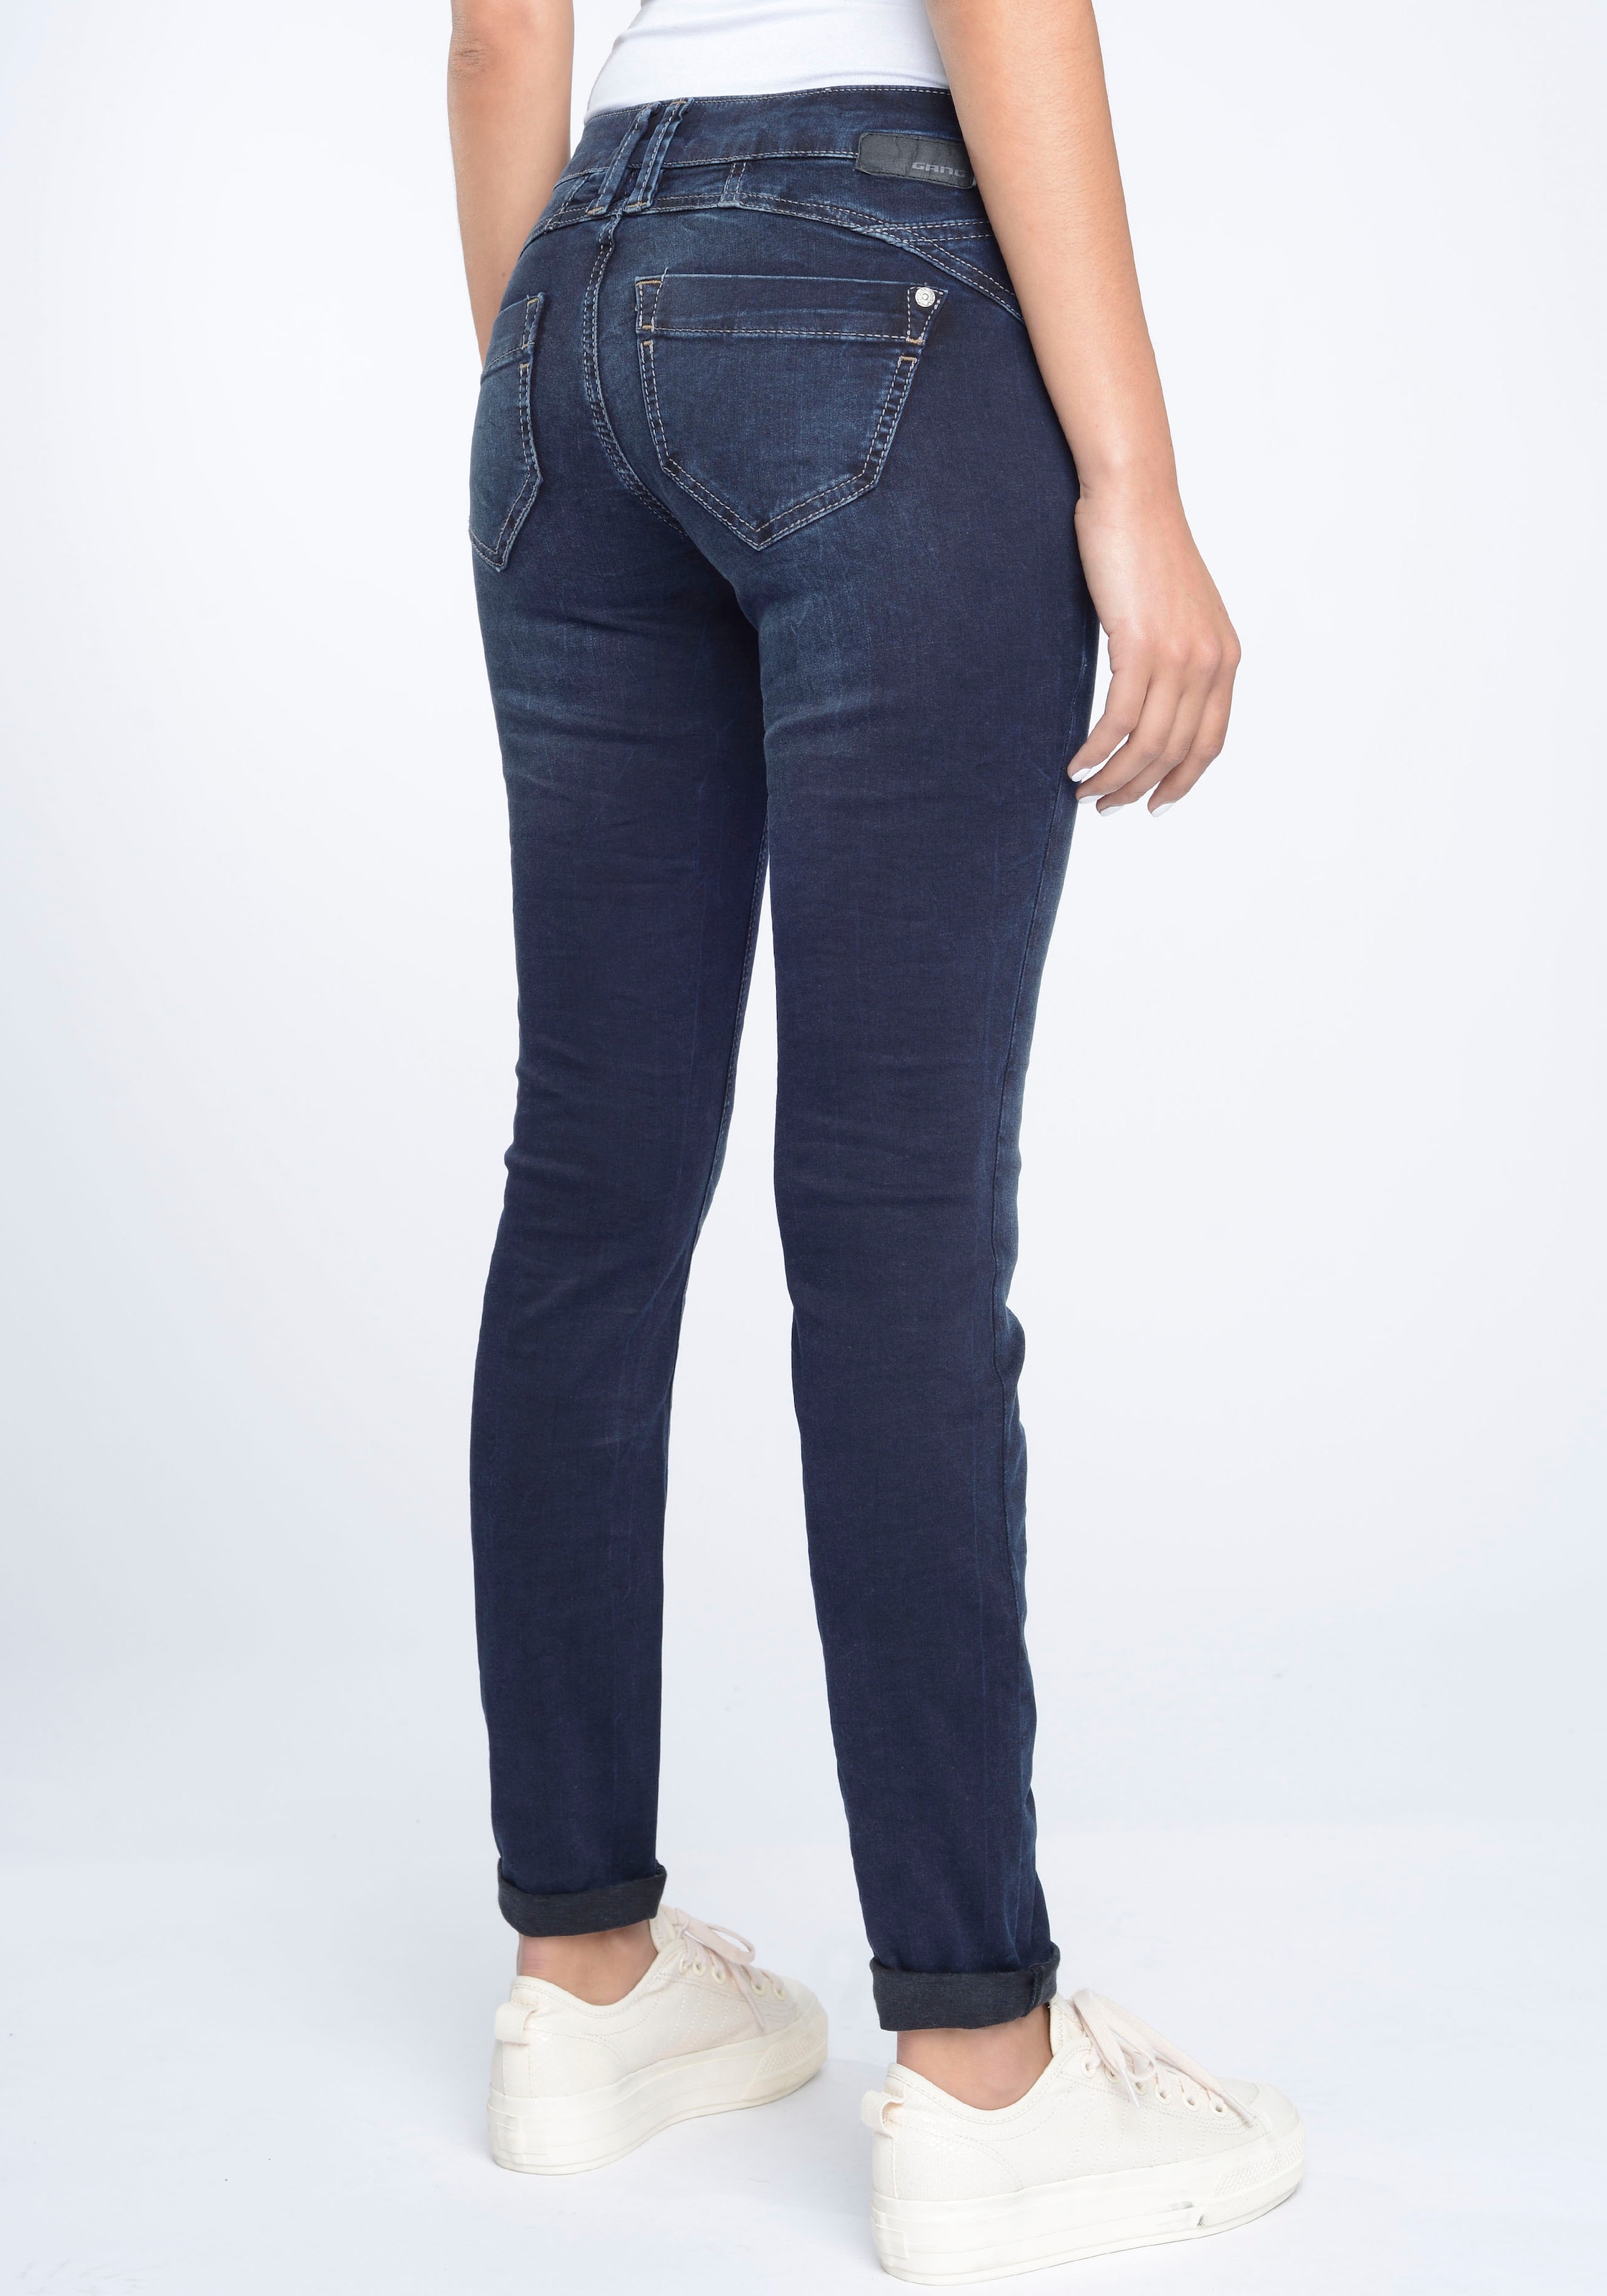 GANG Skinny-fit-Jeans »94Nena«, in authenischer Used-Waschung bei ♕